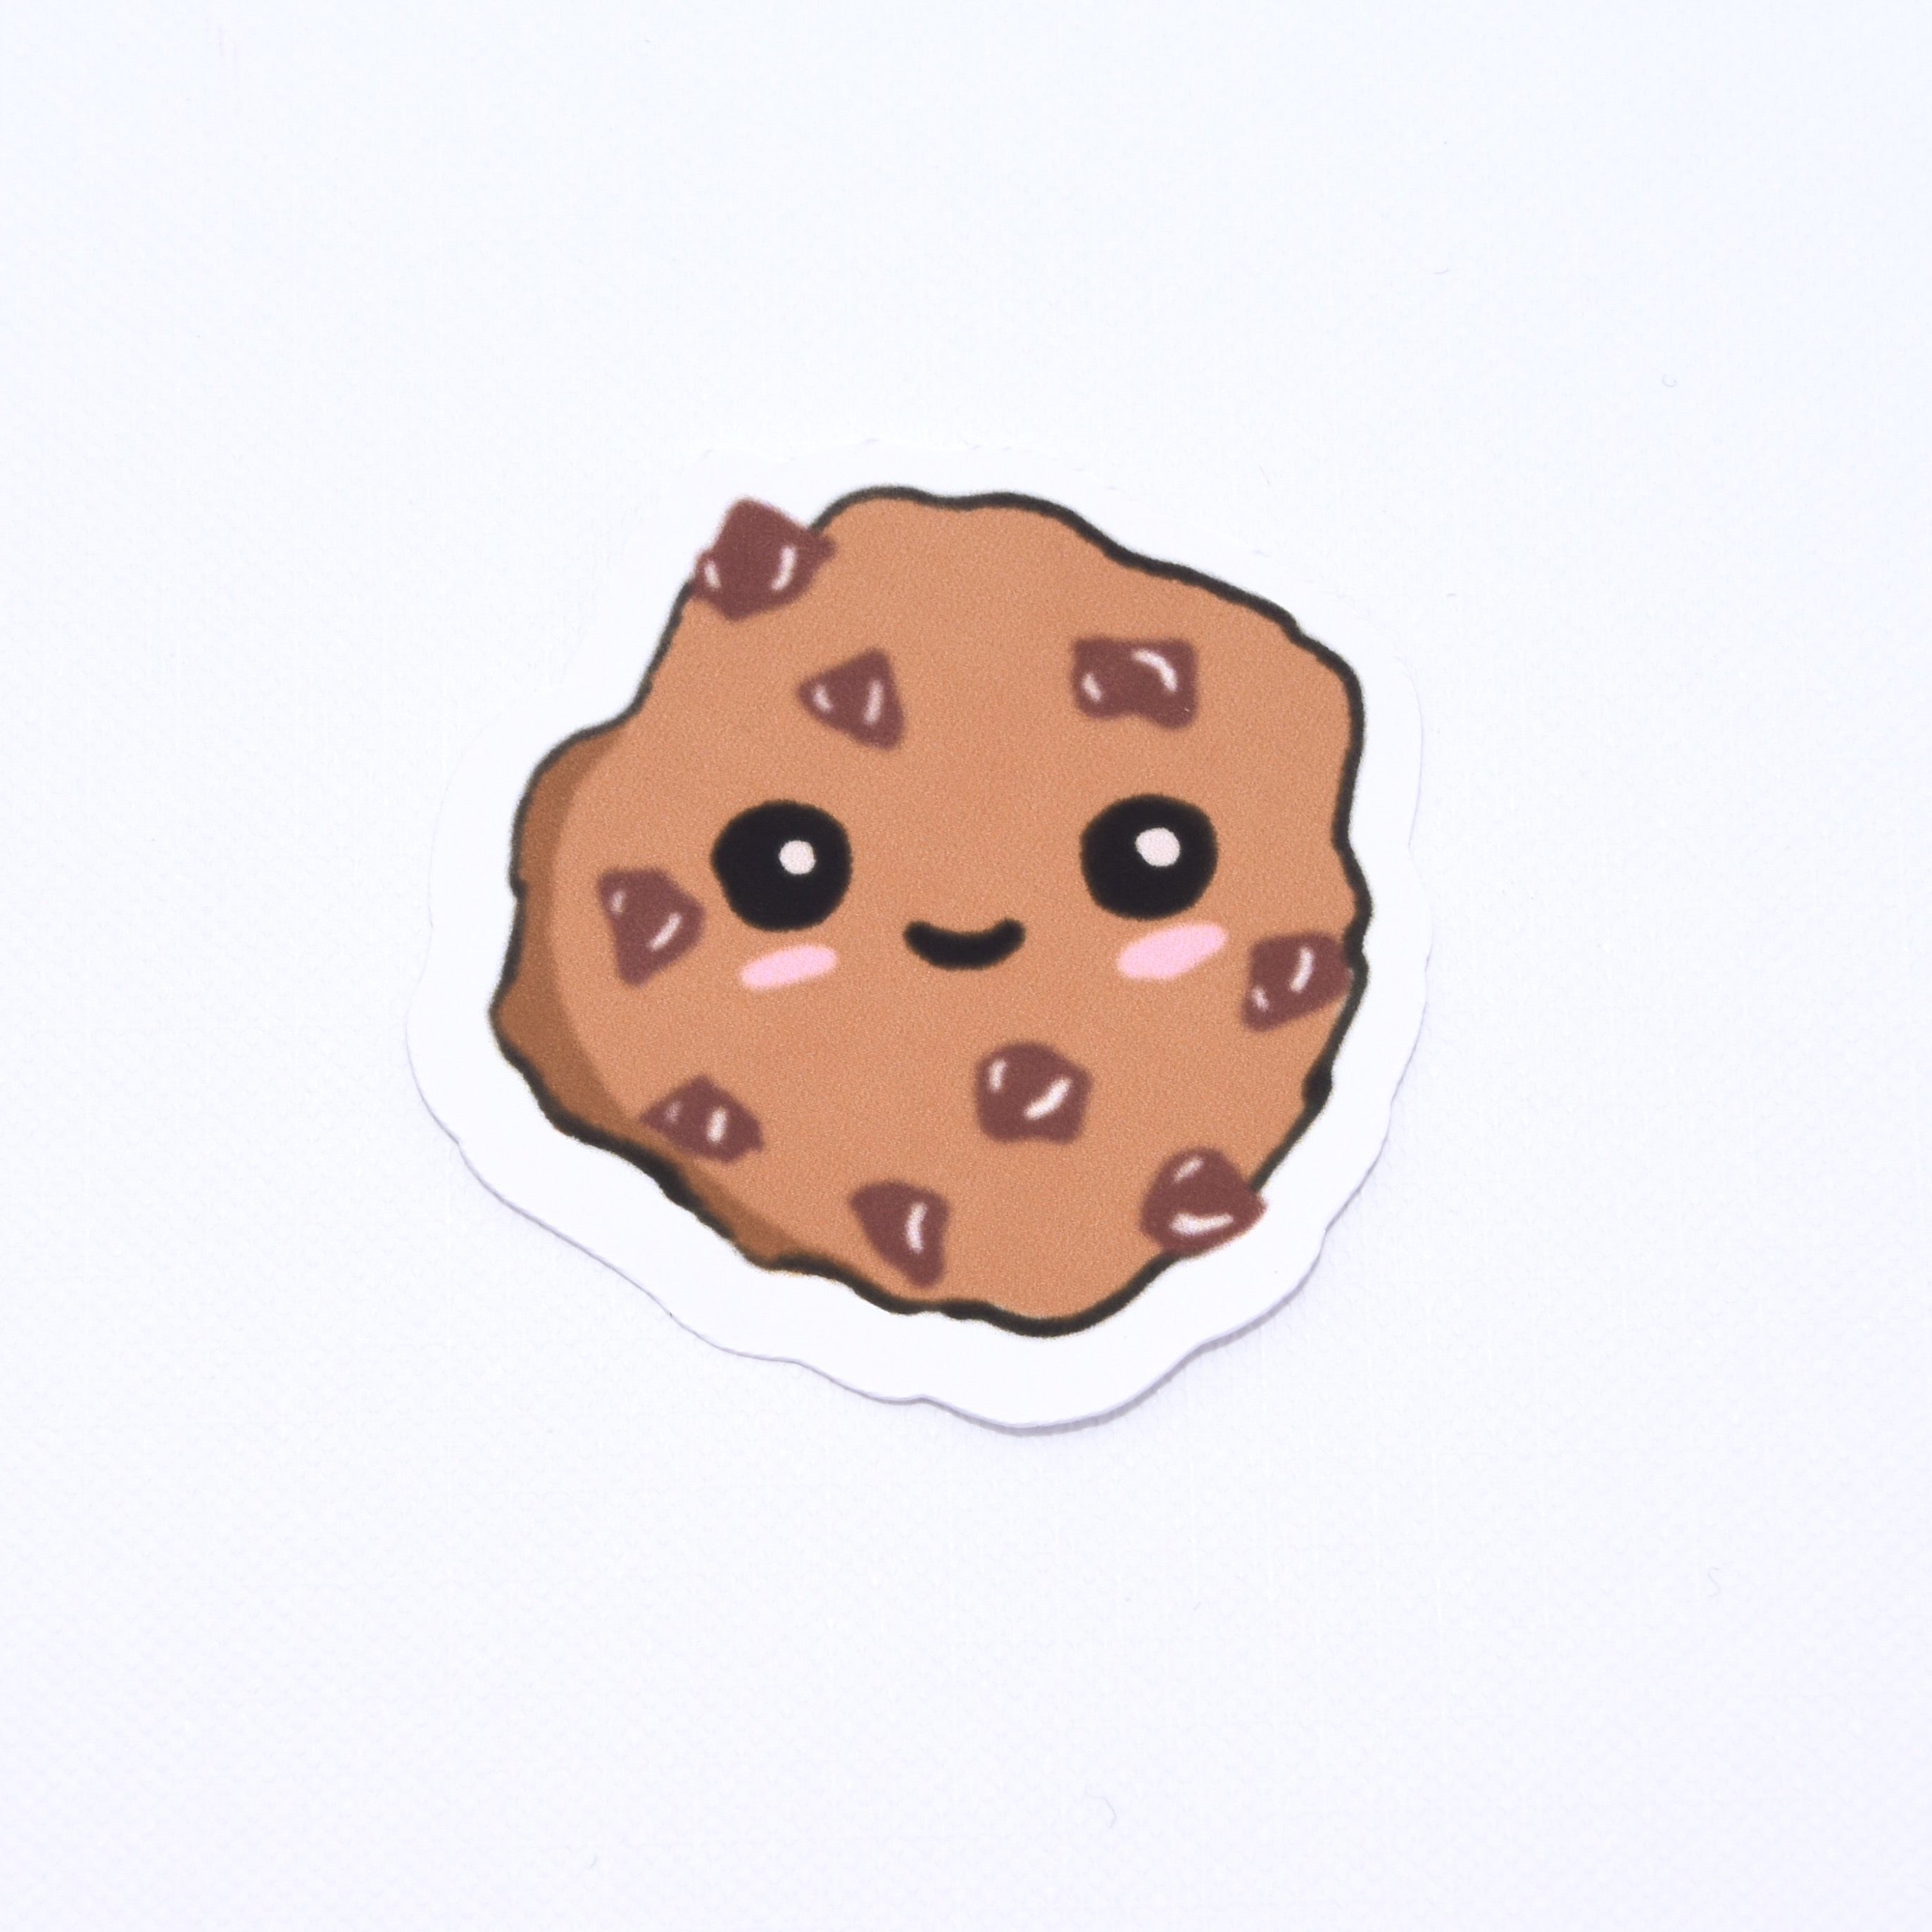 Emoji - Cartoon cake character running and throwing candy - CleanPNG /  KissPNG